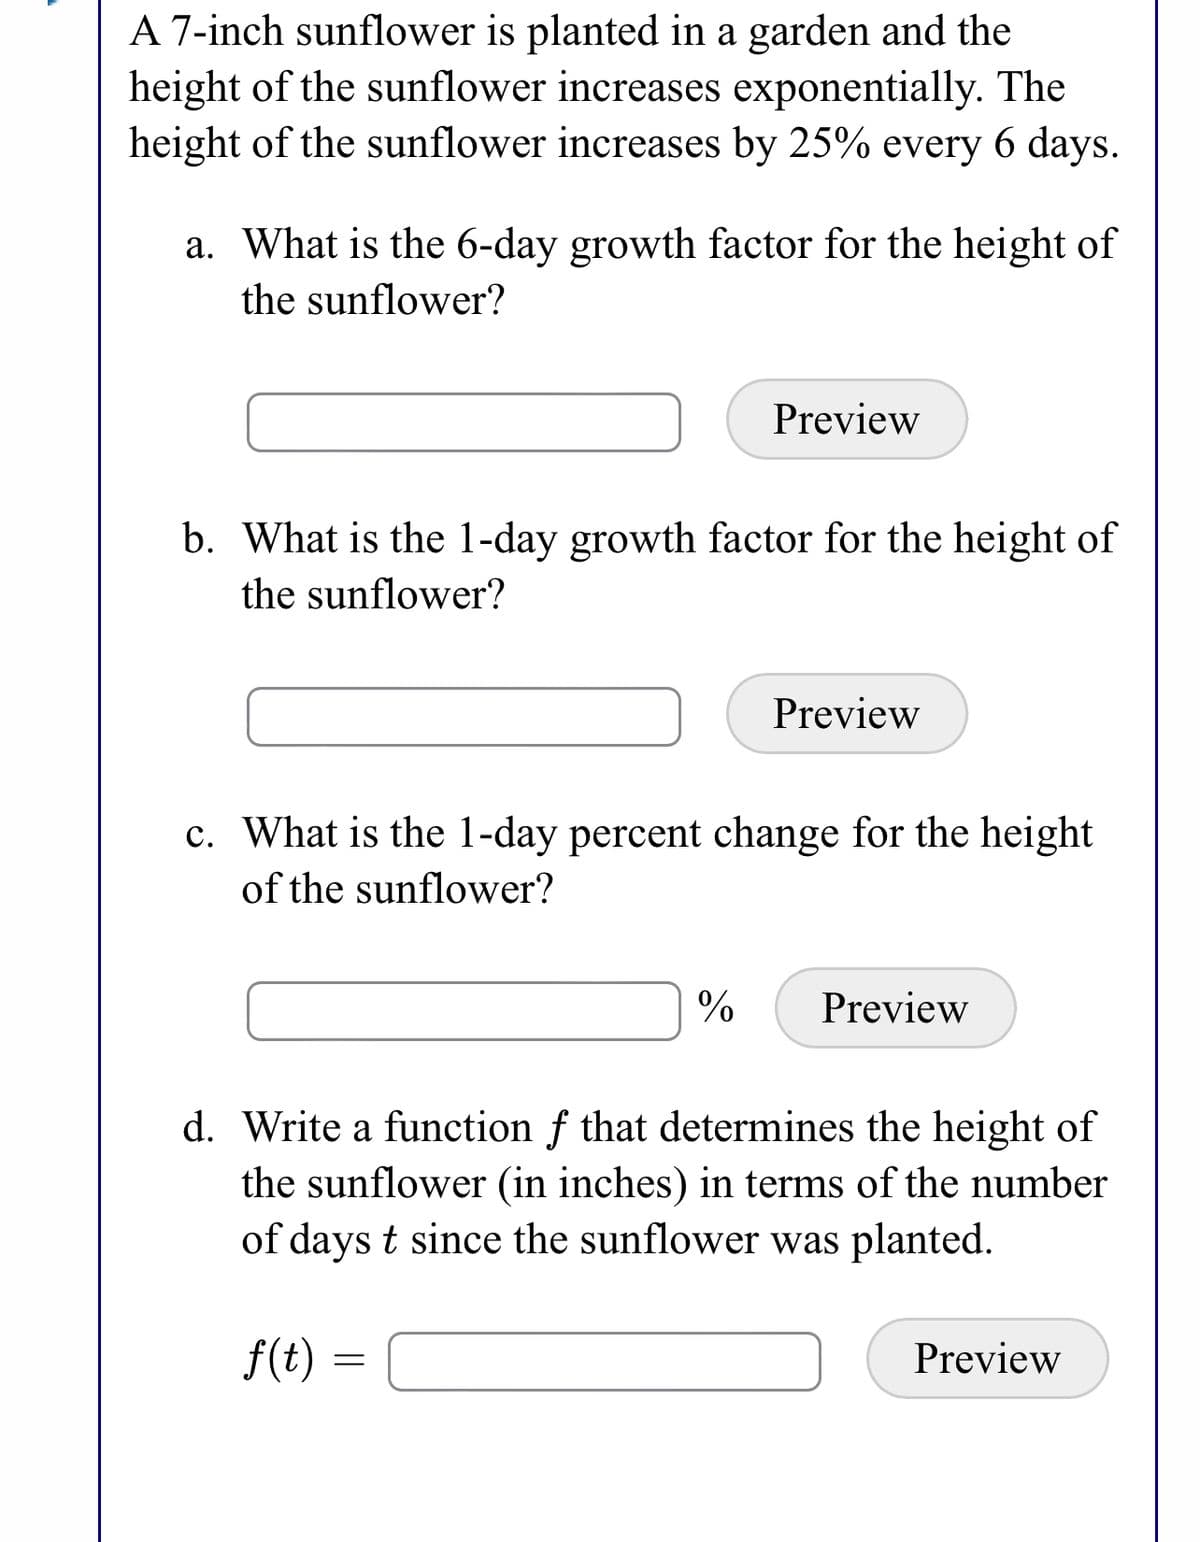 A 7-inch sunflower is planted in a garden and the
height of the sunflower increases exponentially. The
height of the sunflower increases by 25% every 6 days.
a. What is the 6-day growth factor for the height of
the sunflower?
Preview
b. What is the 1-day growth factor for the height of
the sunflower?
Preview
c. What is the 1-day percent change for the height
of the sunflower?
Preview
d. Write a function f that determines the height of
the sunflower (in inches) in terms of the number
of days t since the sunflower was planted.
f(t) =
Preview
